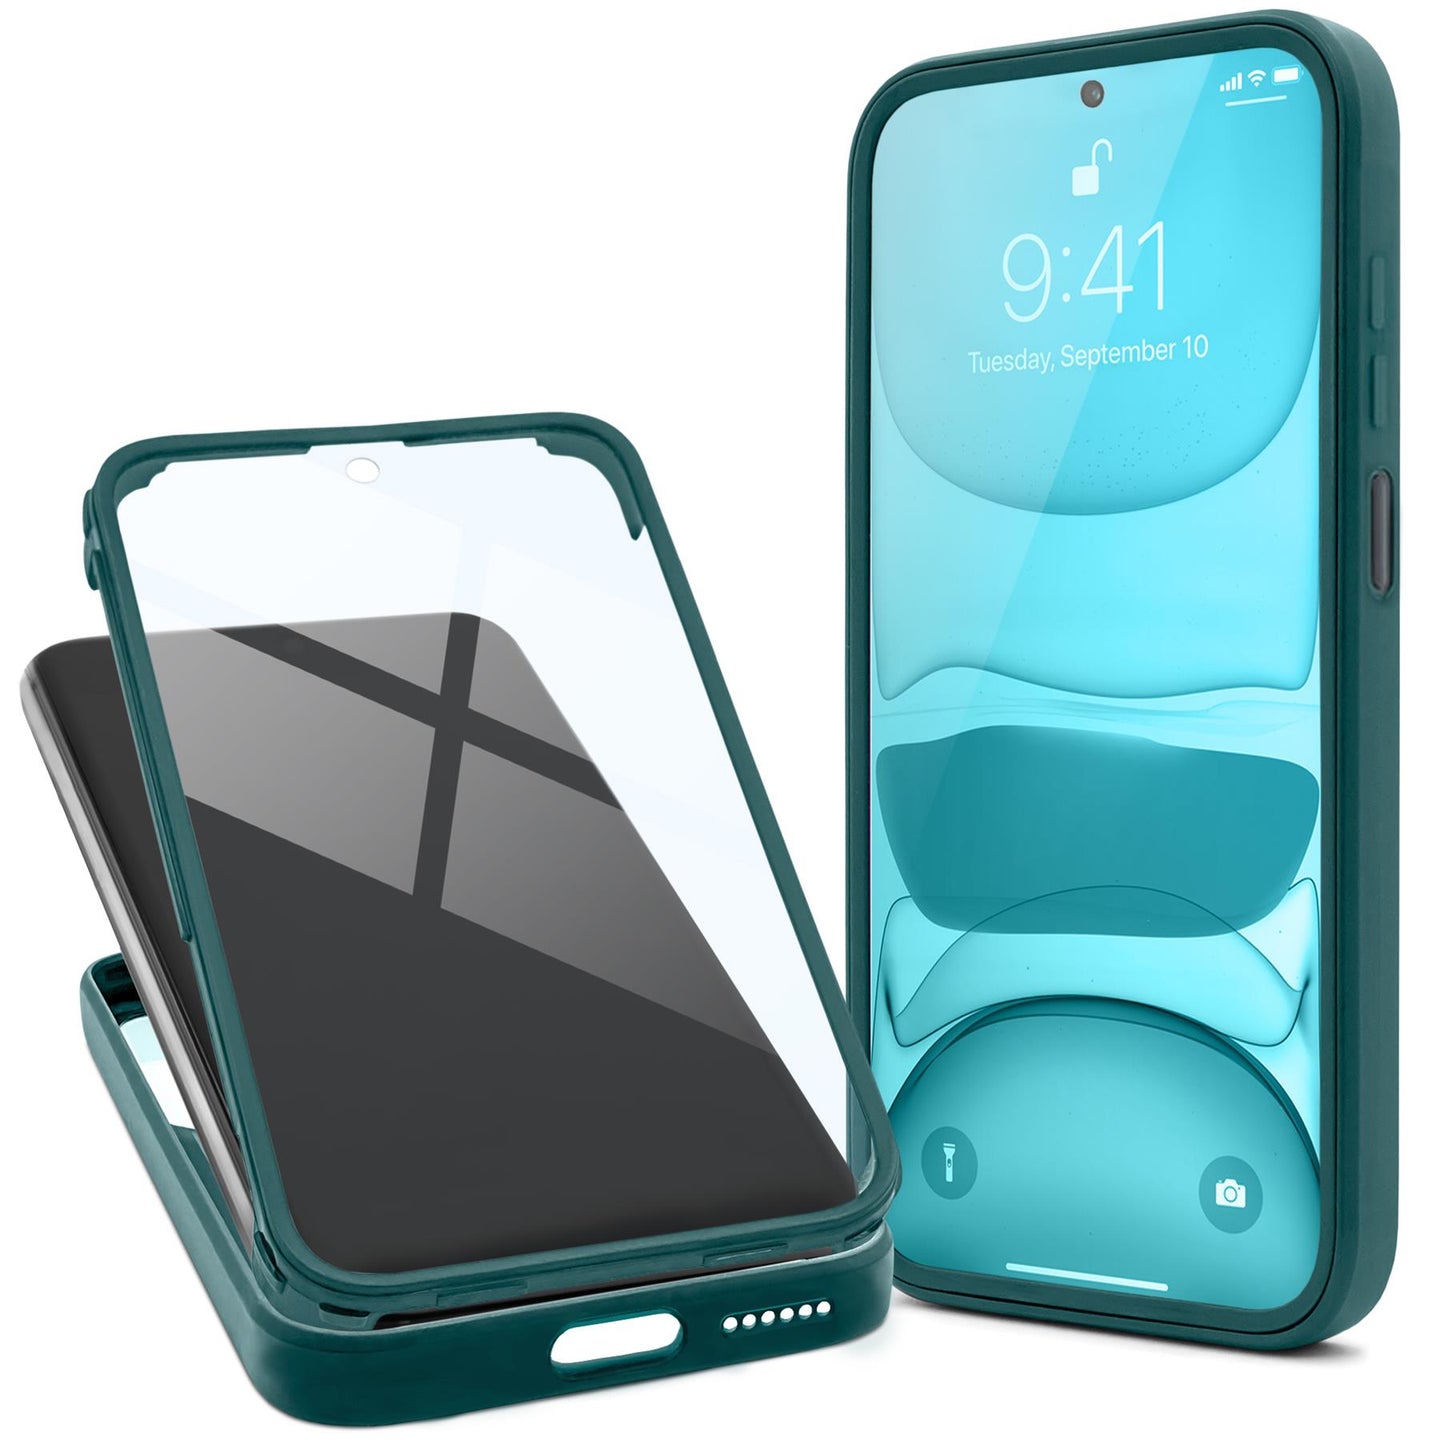 Moozy 360 Case for Xiaomi 11T and 11T Pro - Green Rim Transparent Case, Full Body Double-sided Protection, Cover with Built-in Screen Protector